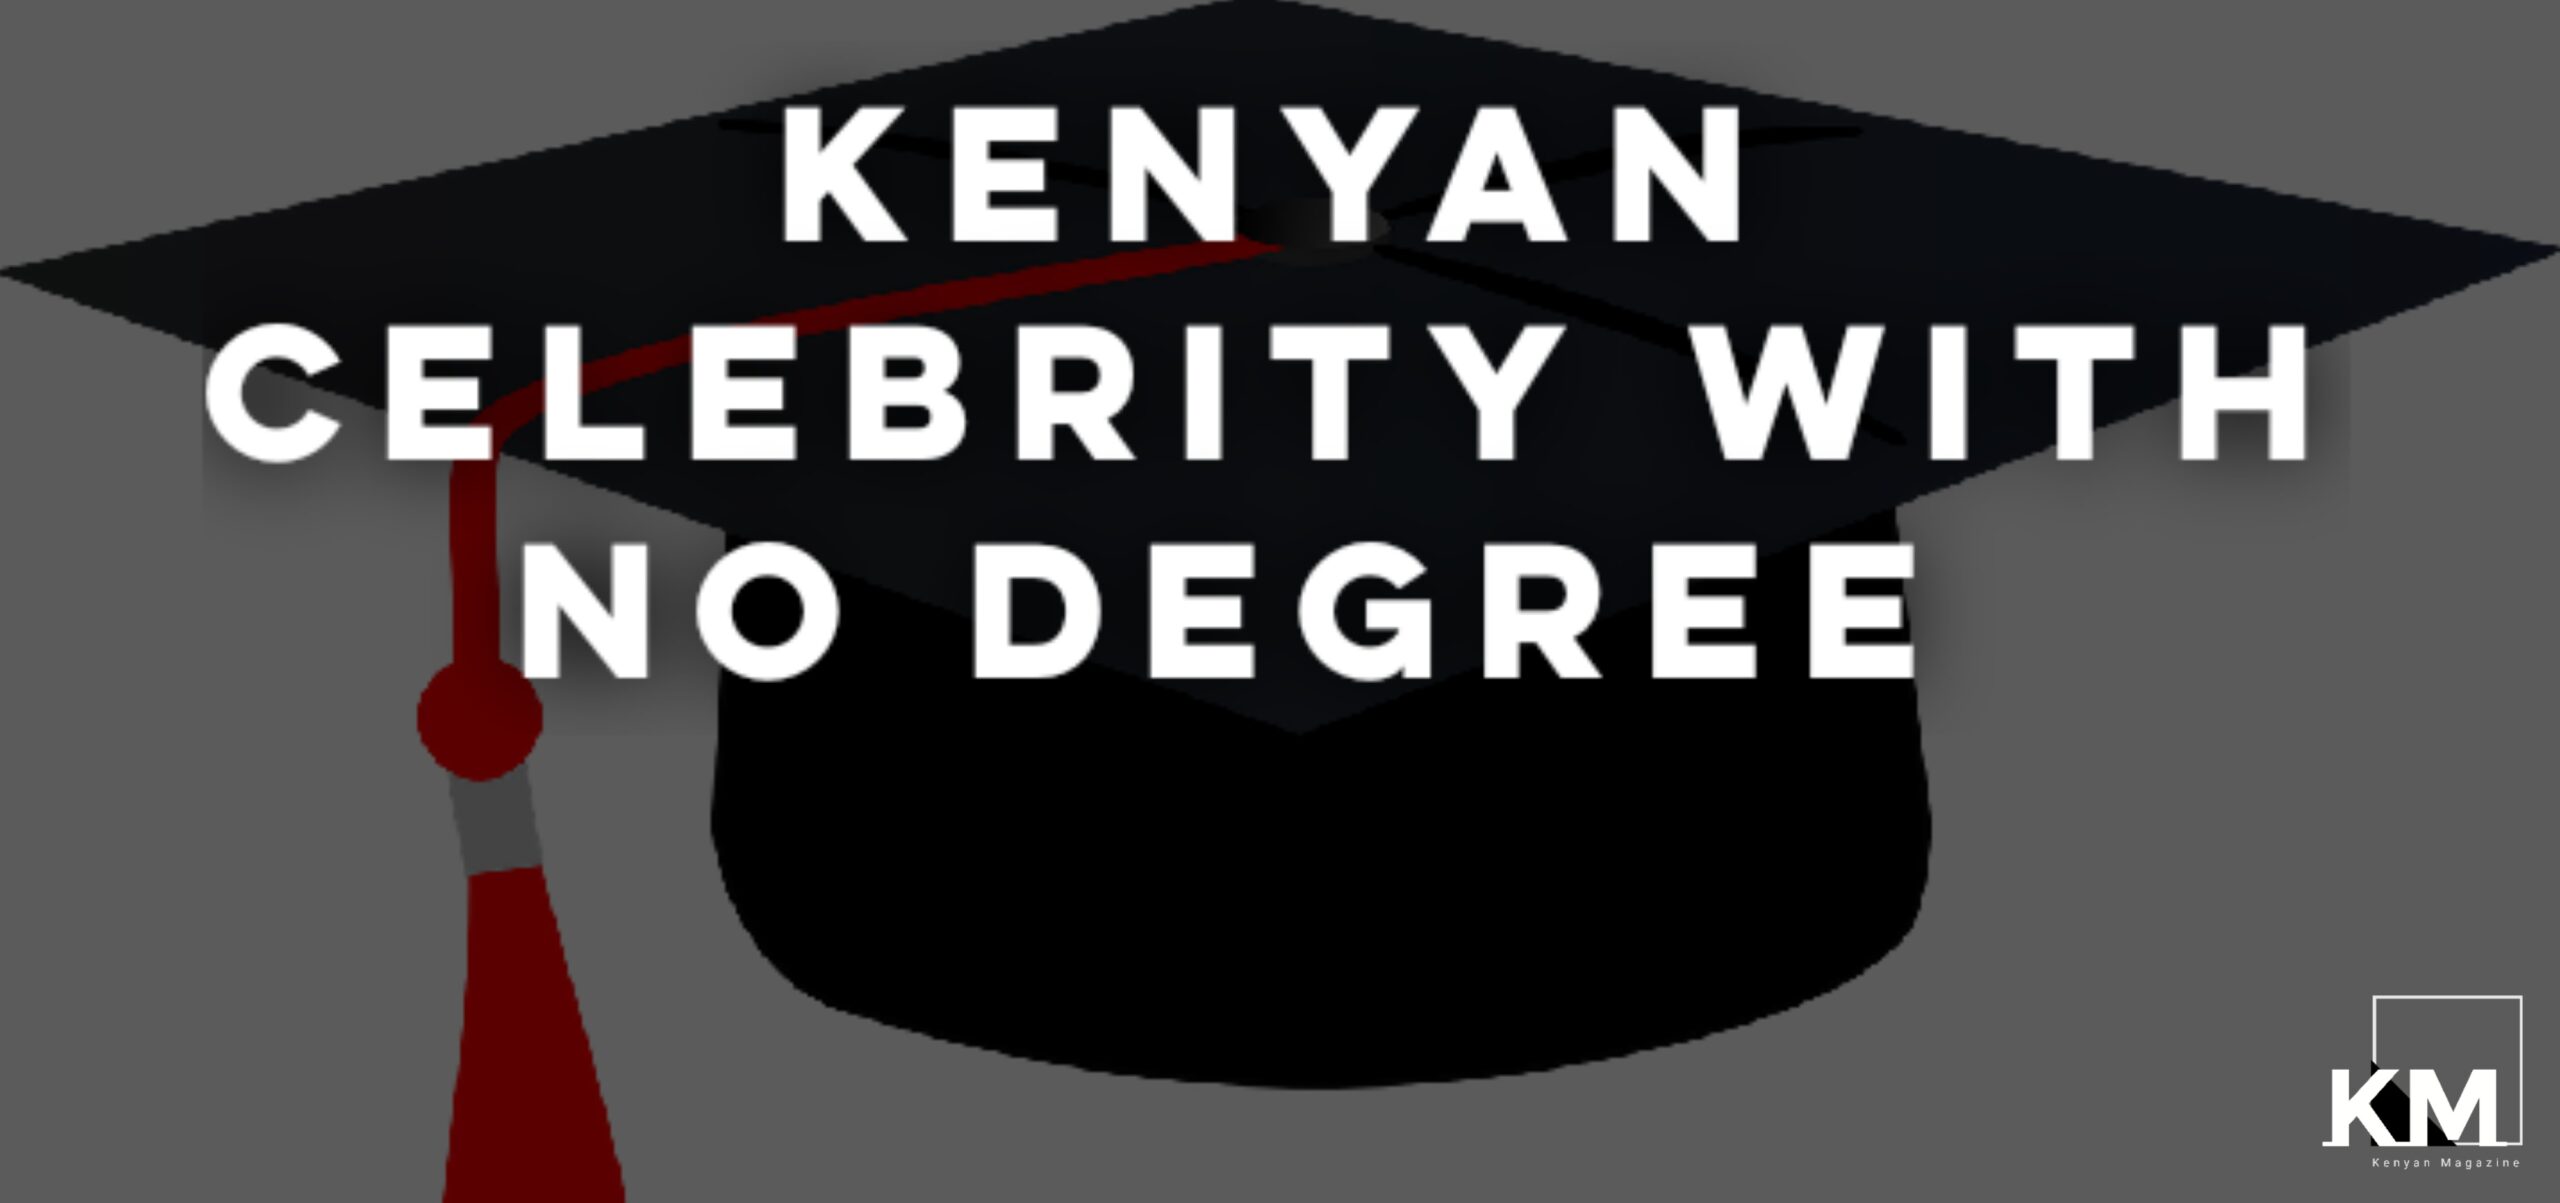 Celebrity with no degree in Kenya